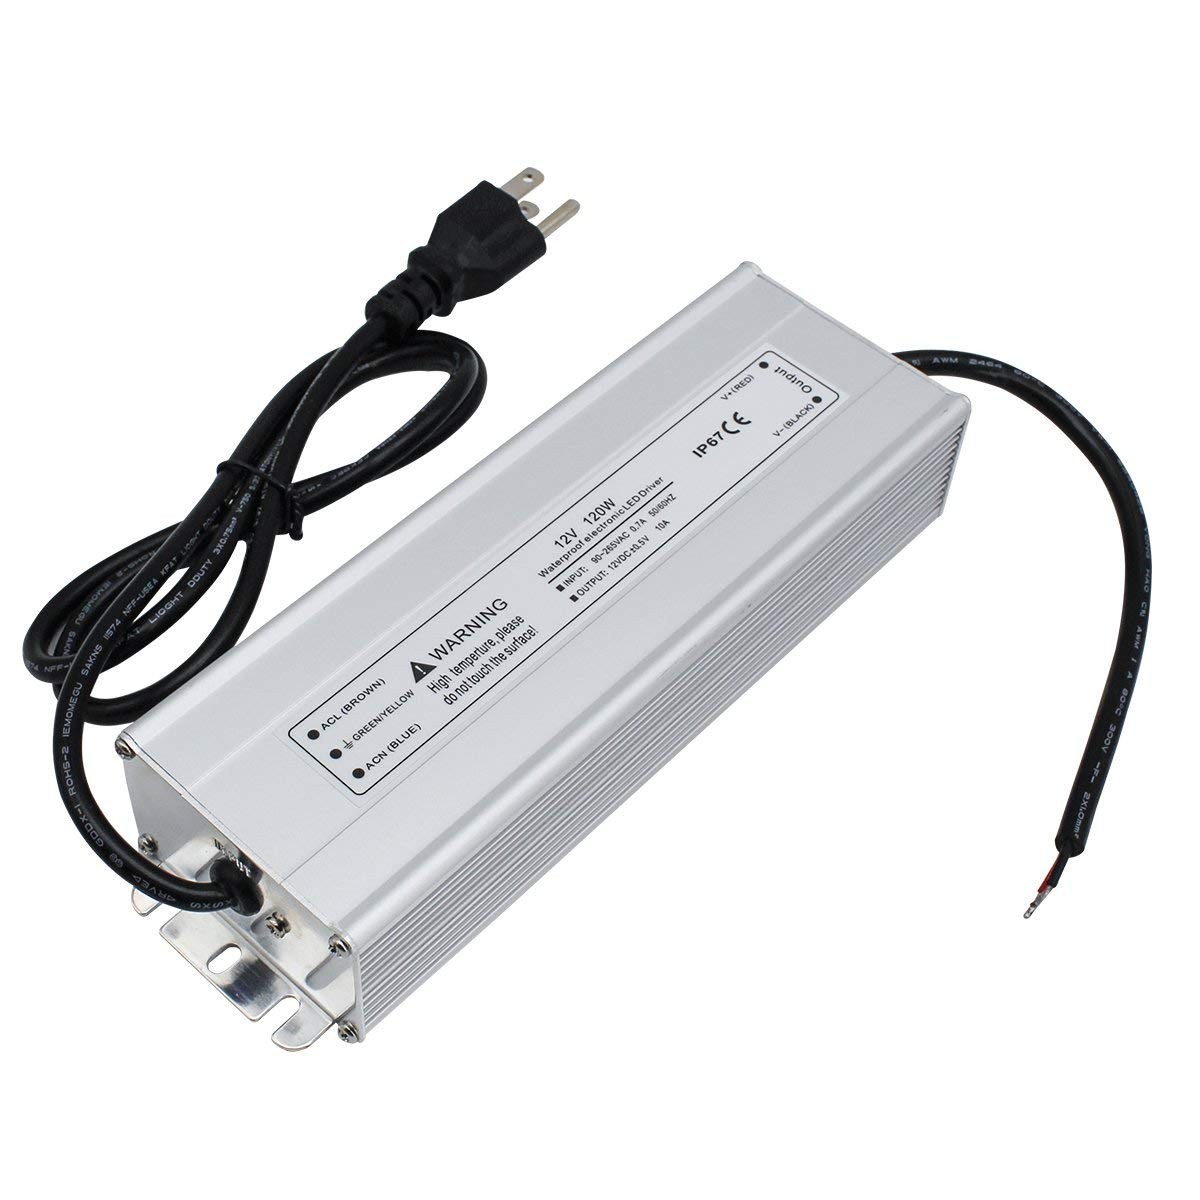 LED Power Supplies, LED Drivers & LED Transformers Online Shopping